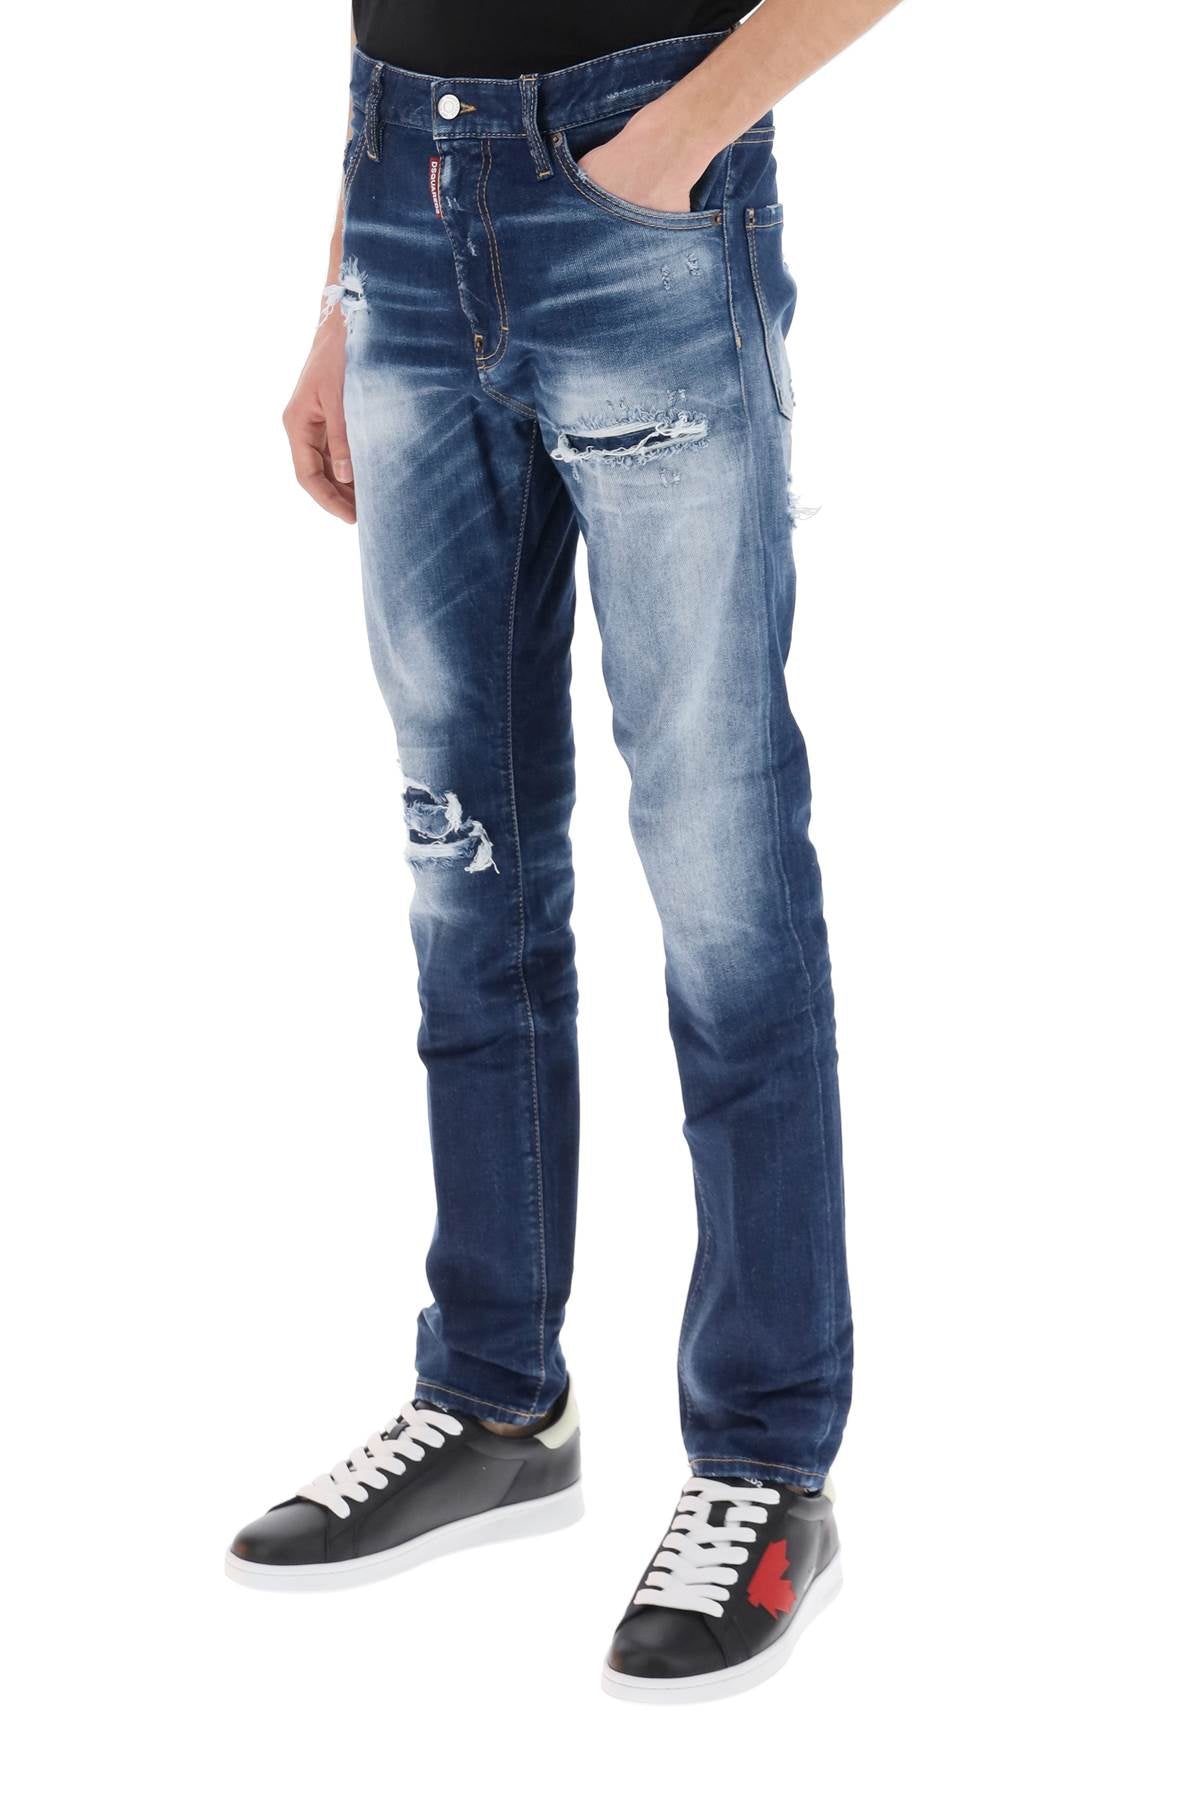 Dsquared2 Dsquared2 cool guy jeans in medium worn out booty wash